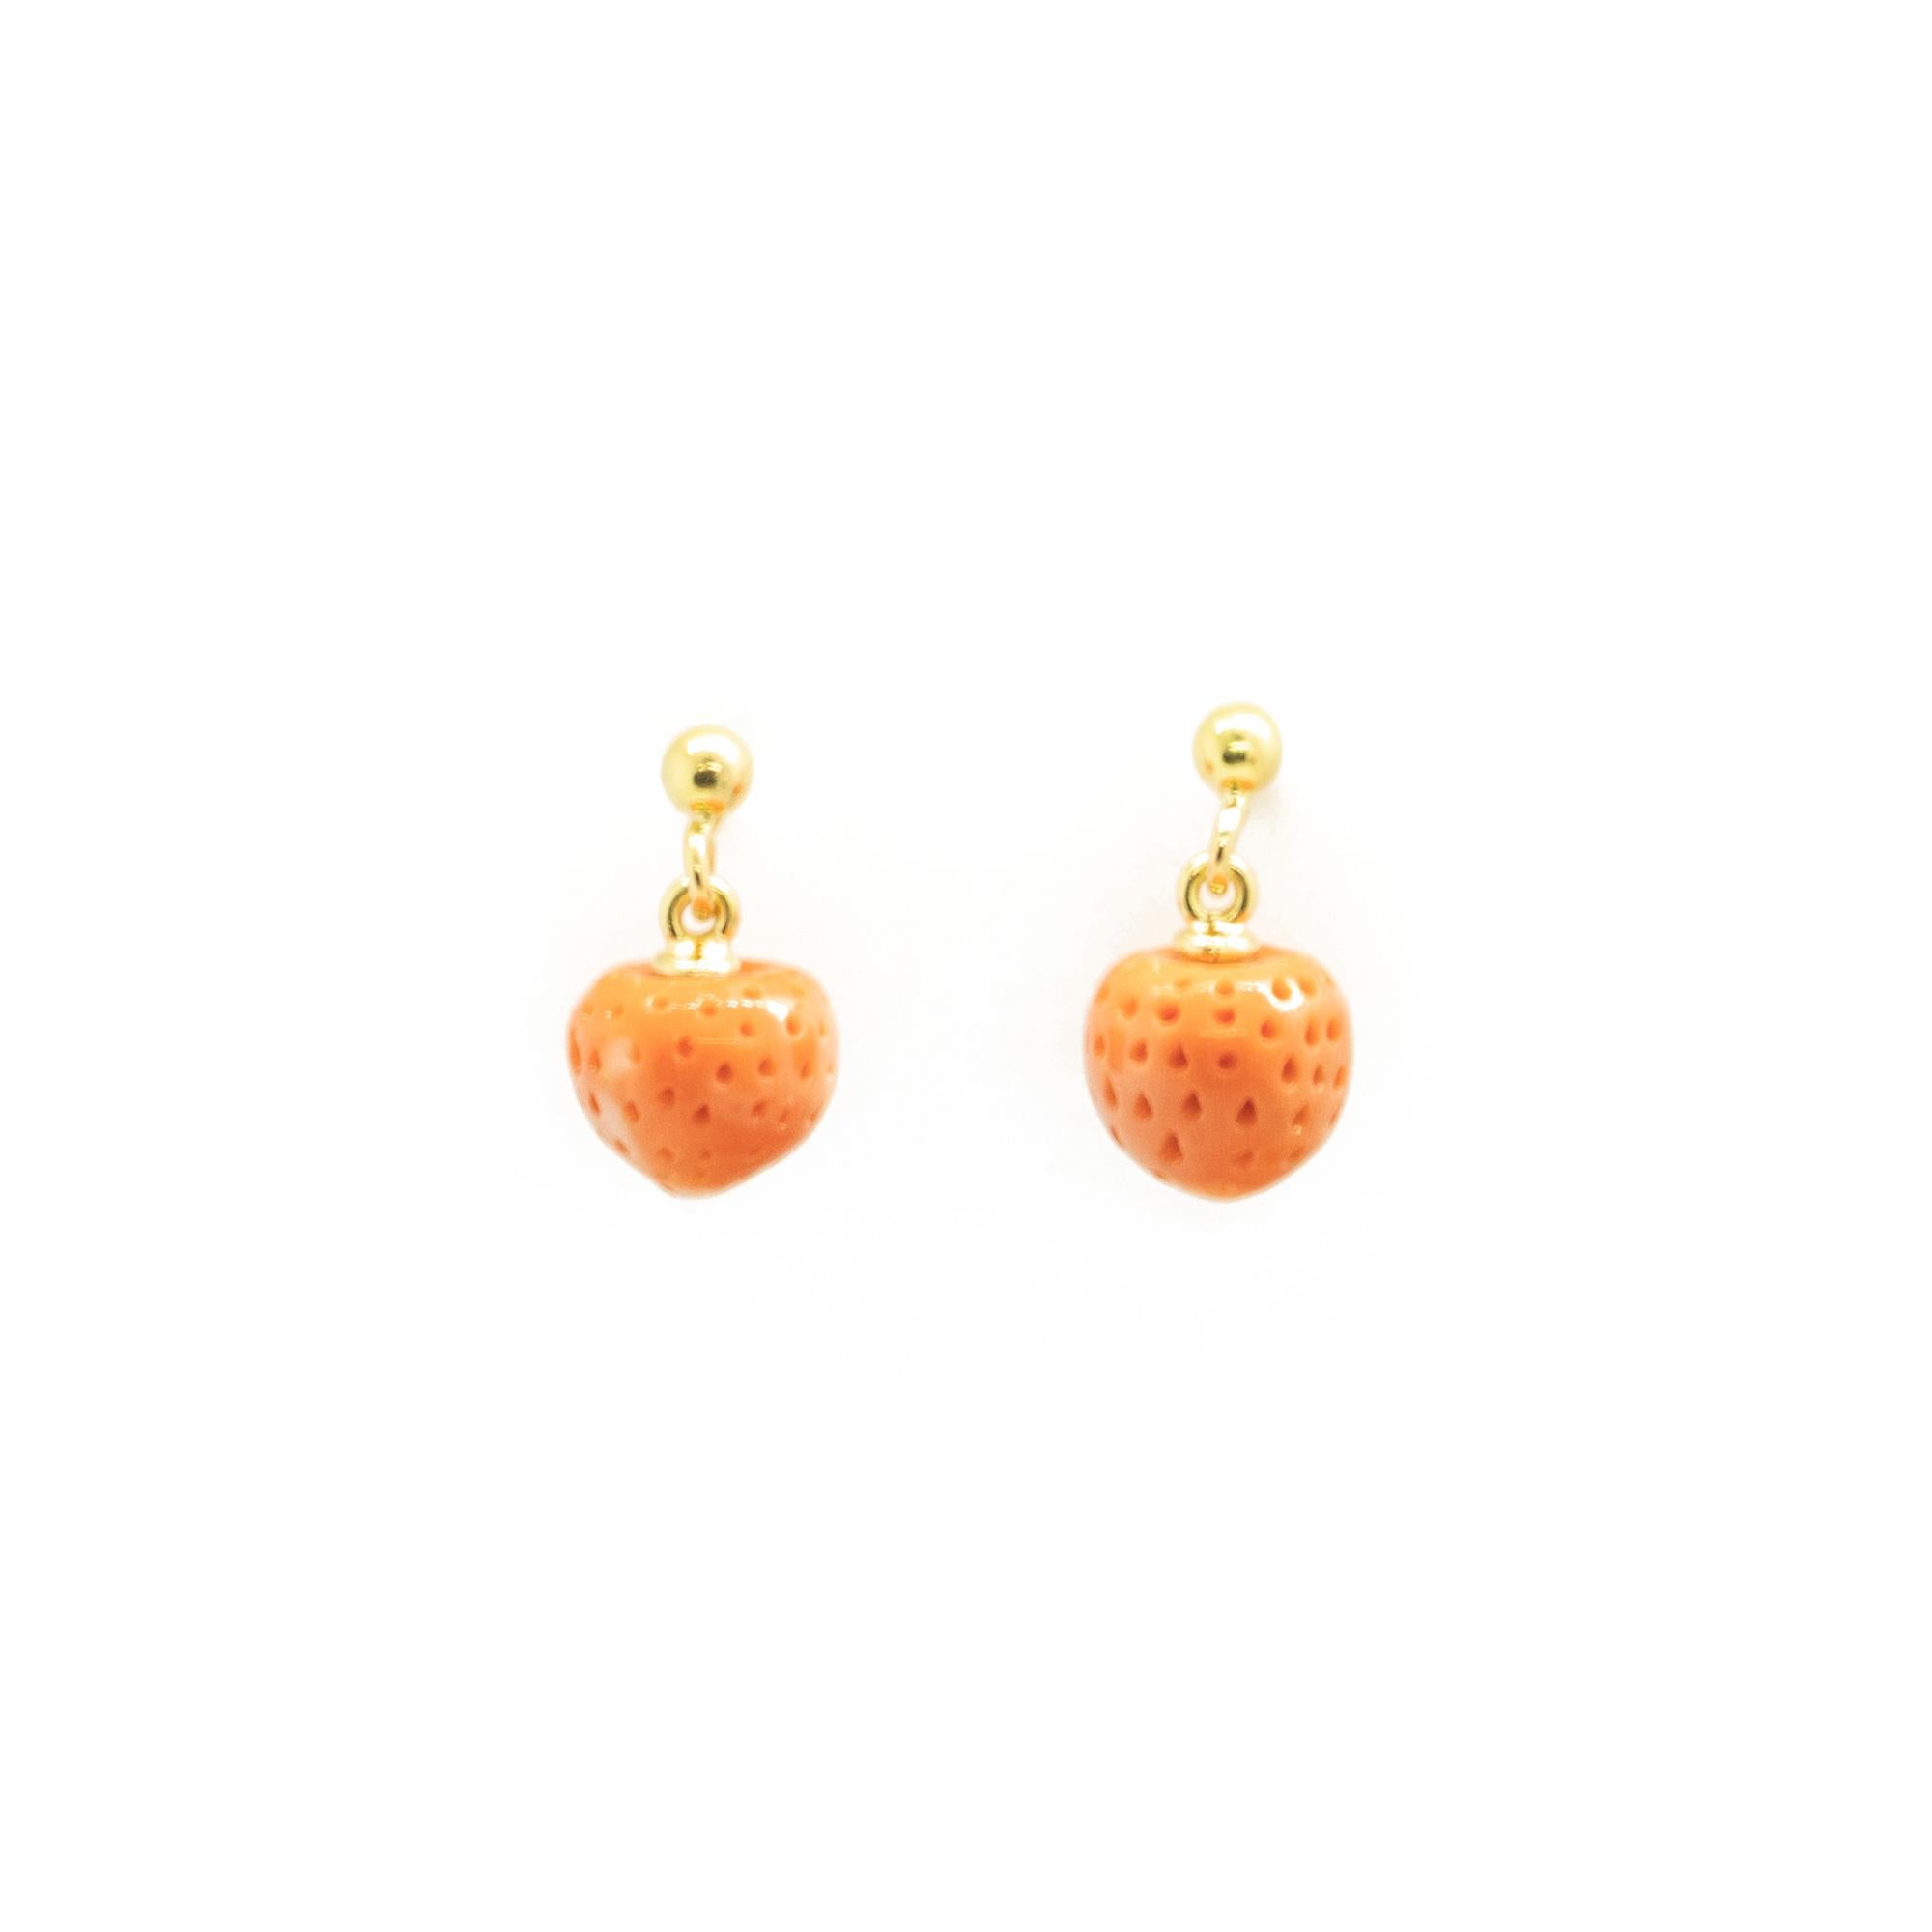 Astonishing and sweet mediterranean strawberry coral earrings. Natural coral carved gems held by 18 karat yellow gold delicate mounting, evoking the Italian handmade traditional jewelry art. 

100% Handmade in Italy High Jewellery.

This delicate